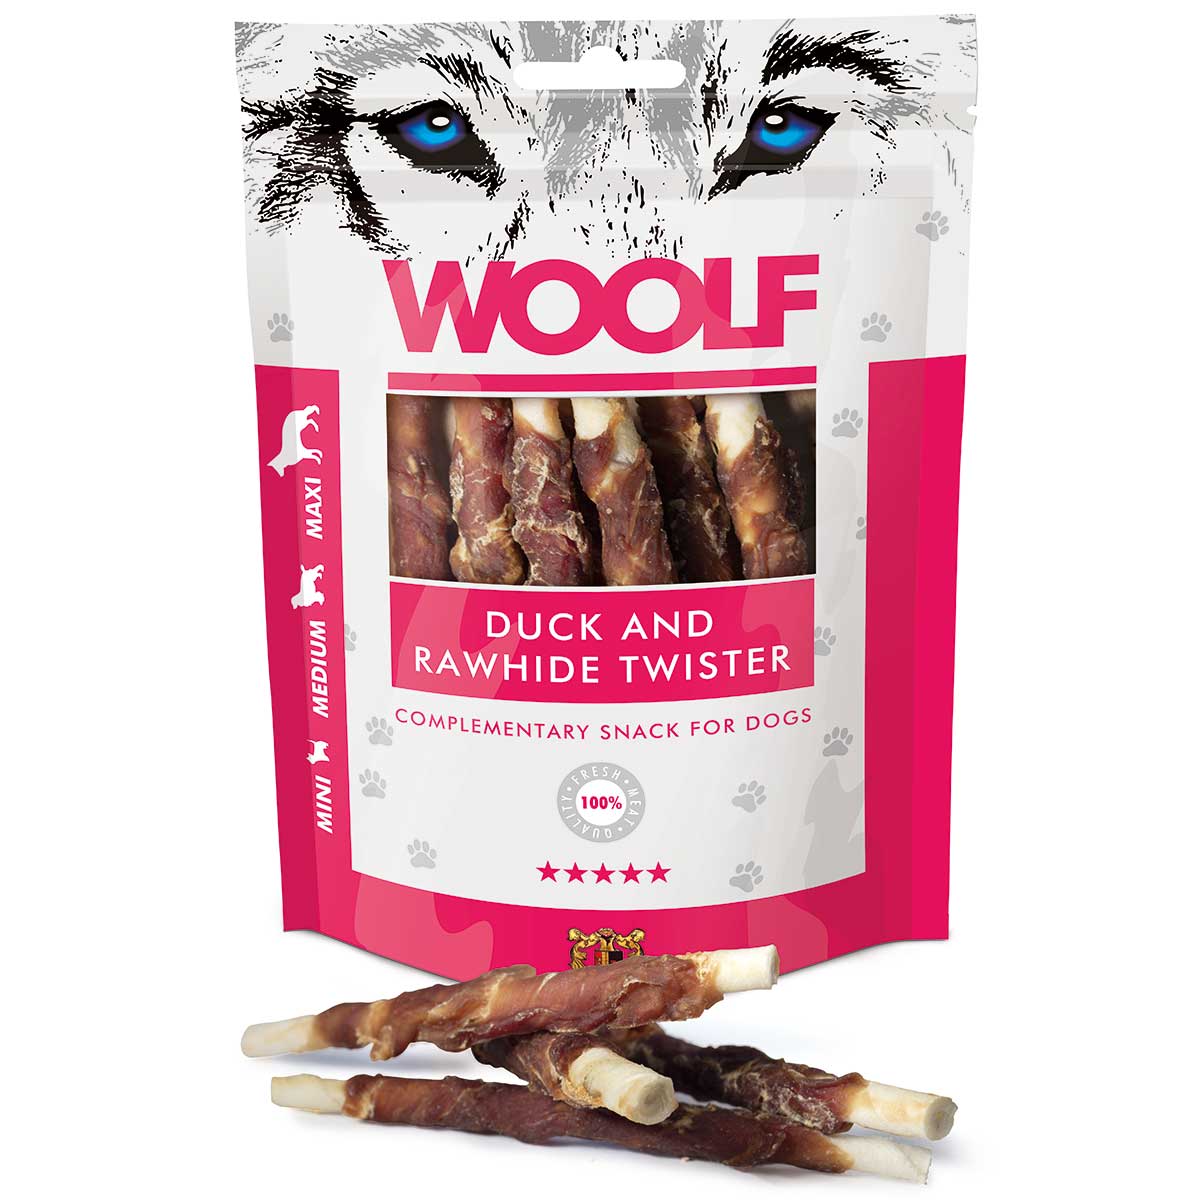 Woolf friandise pour chiens canard Twister